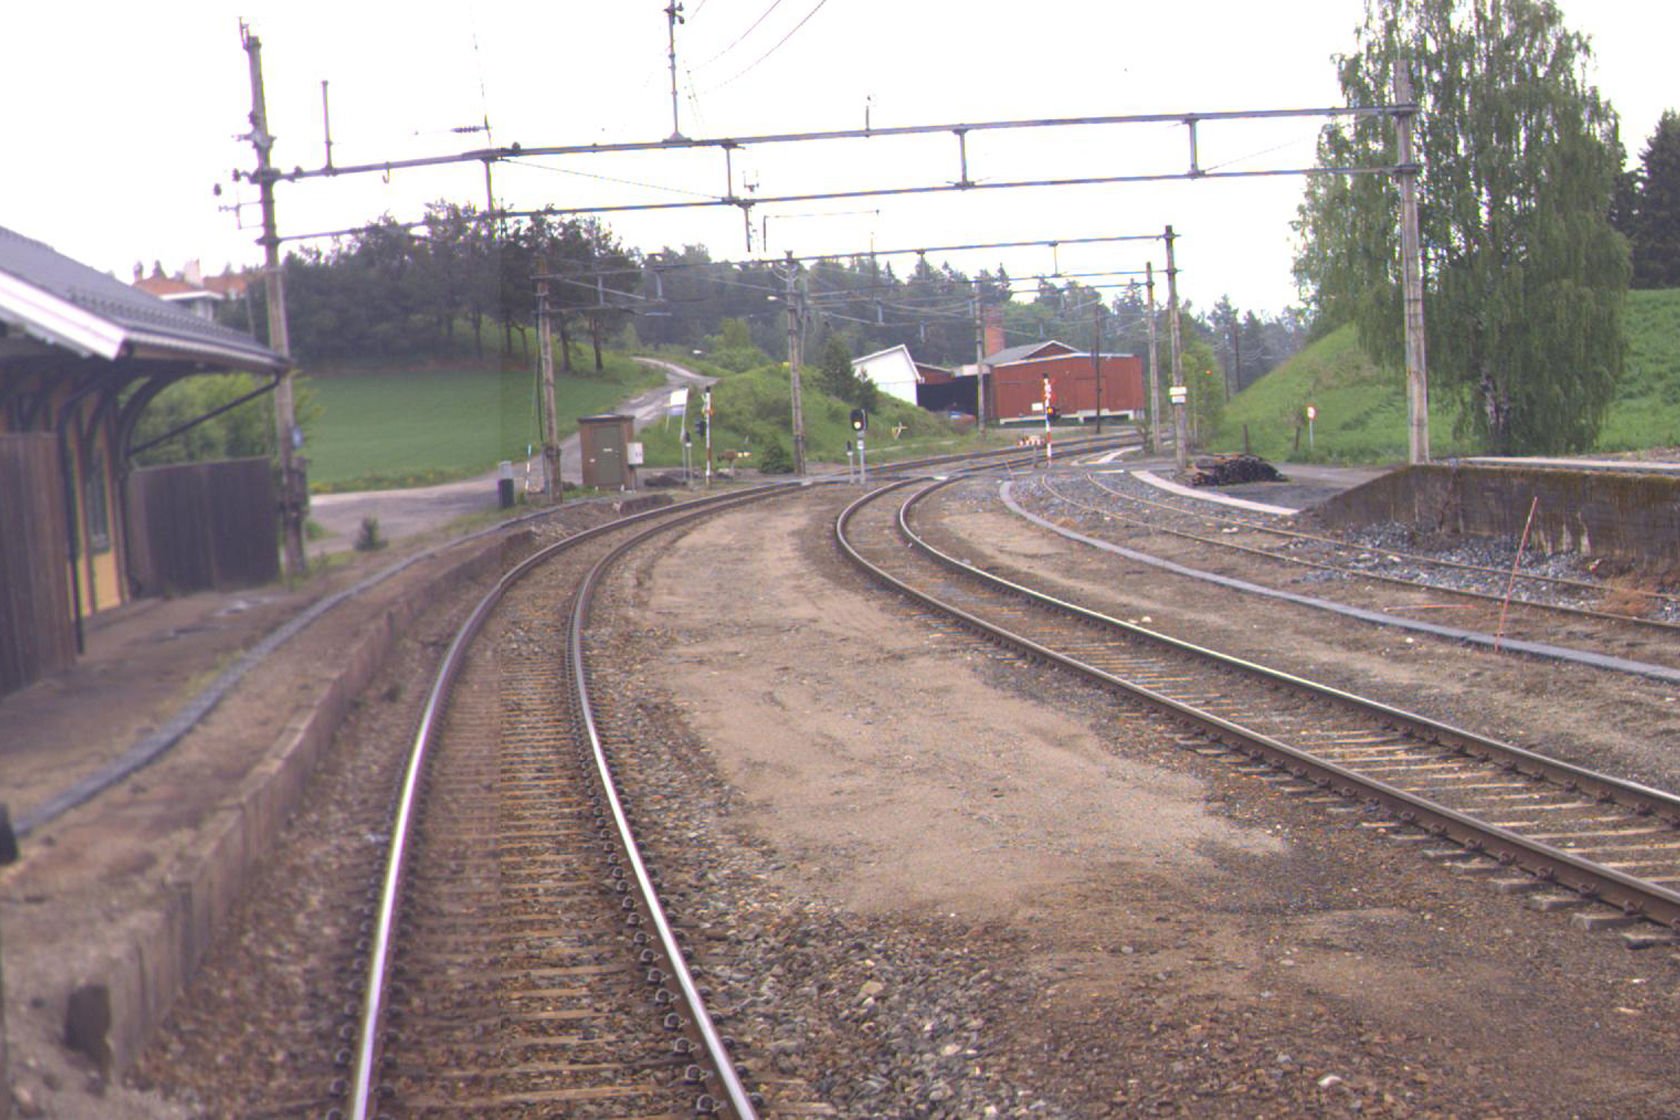 Tracks and building at Tyristrand station